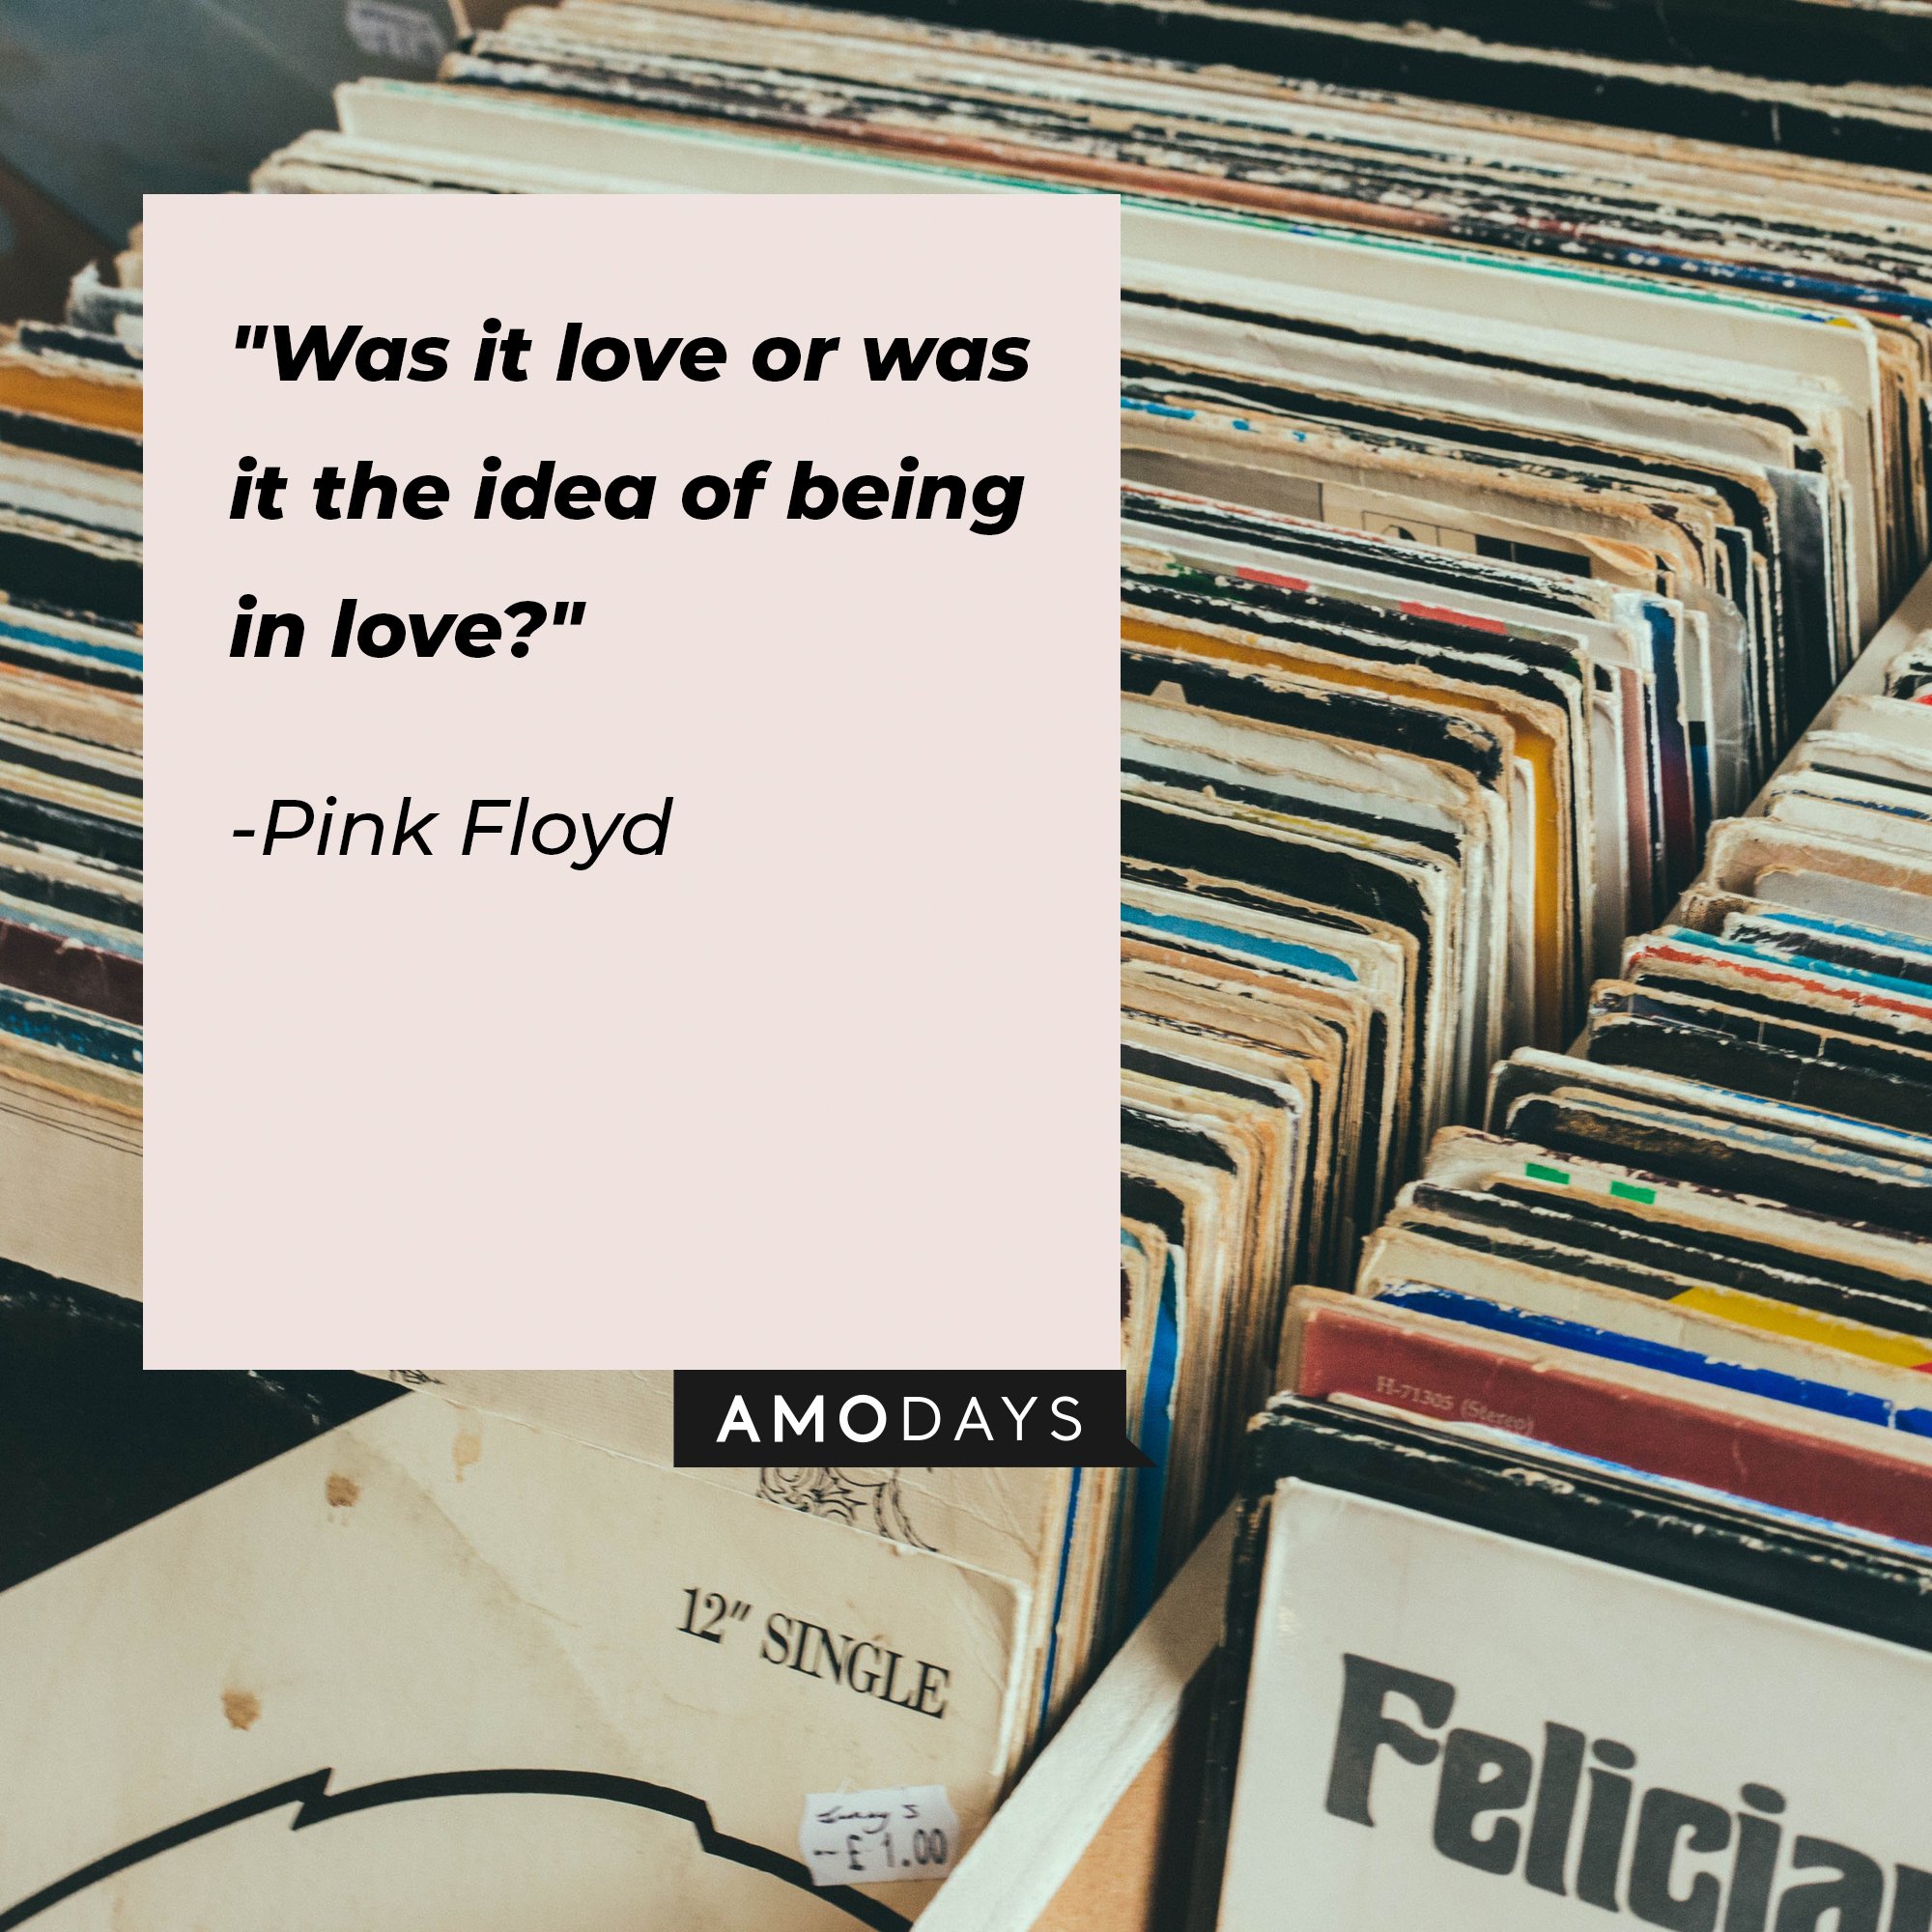 Pink Floyd's quote: "Was it love or was it the idea of being in love?" | Image: AmoDays